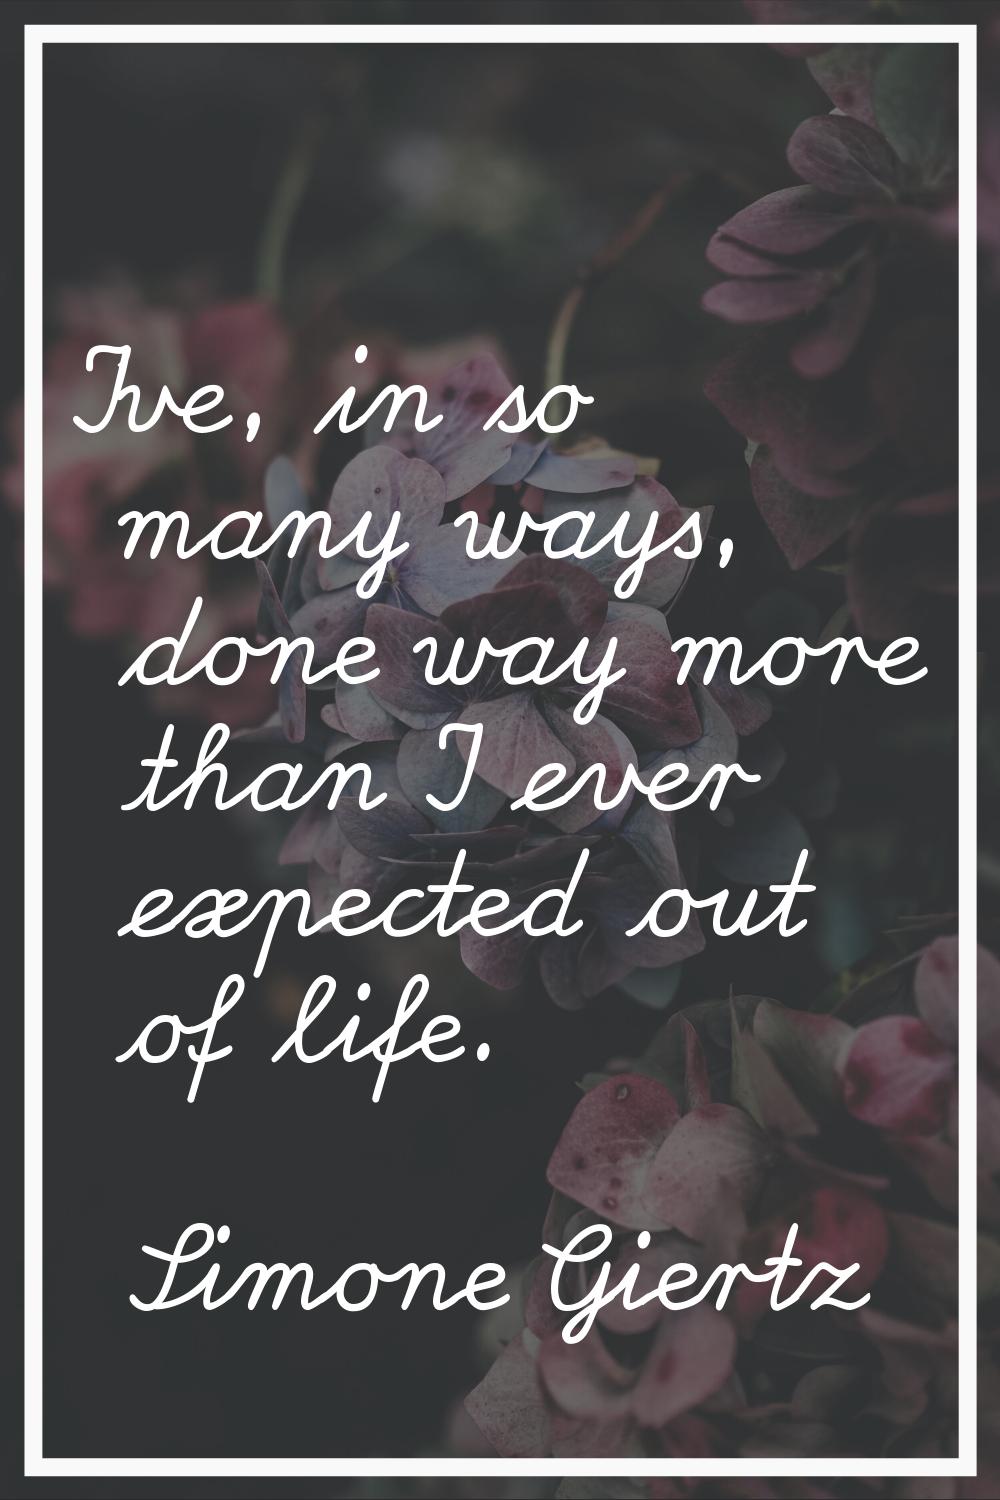 I've, in so many ways, done way more than I ever expected out of life.